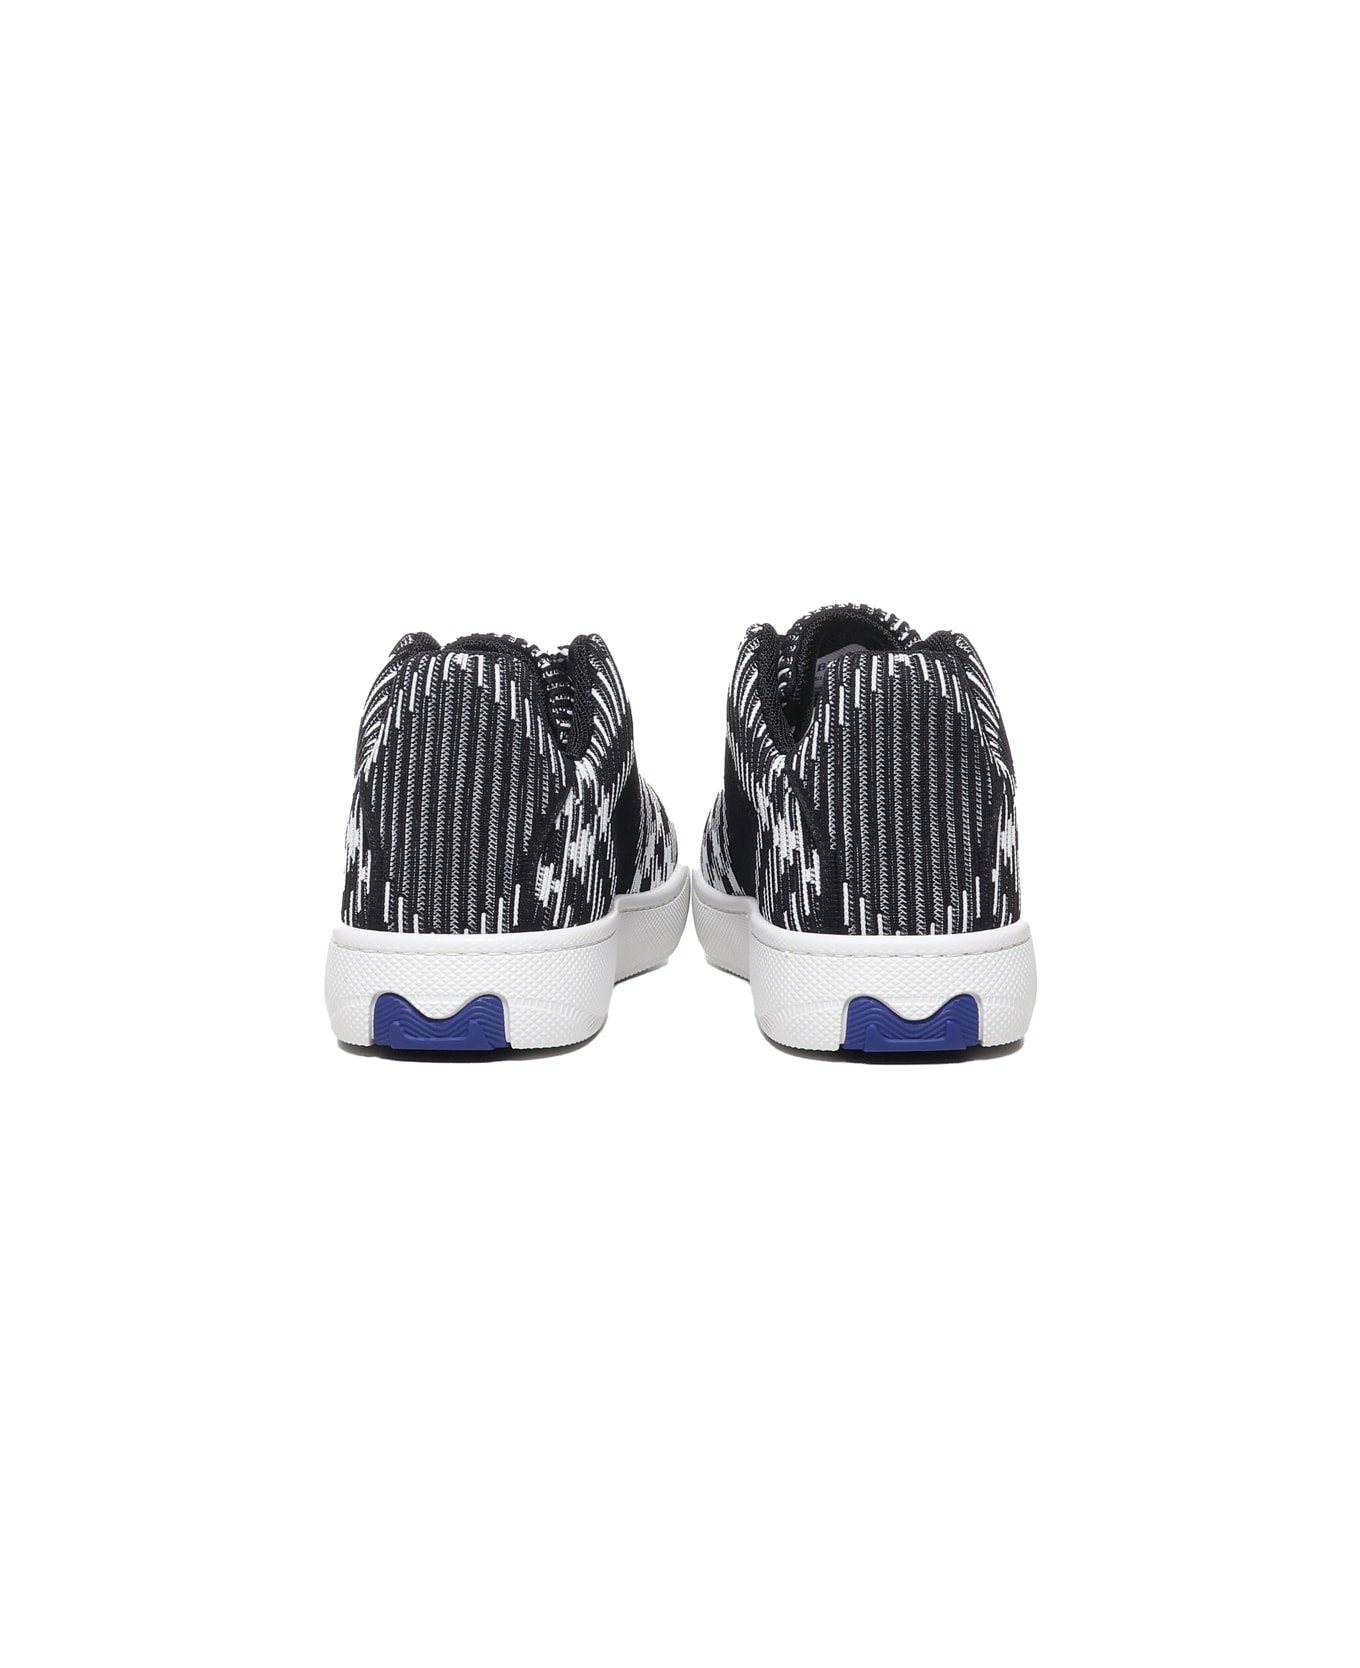 Burberry Box Sneaker With Check Workmanship - Black